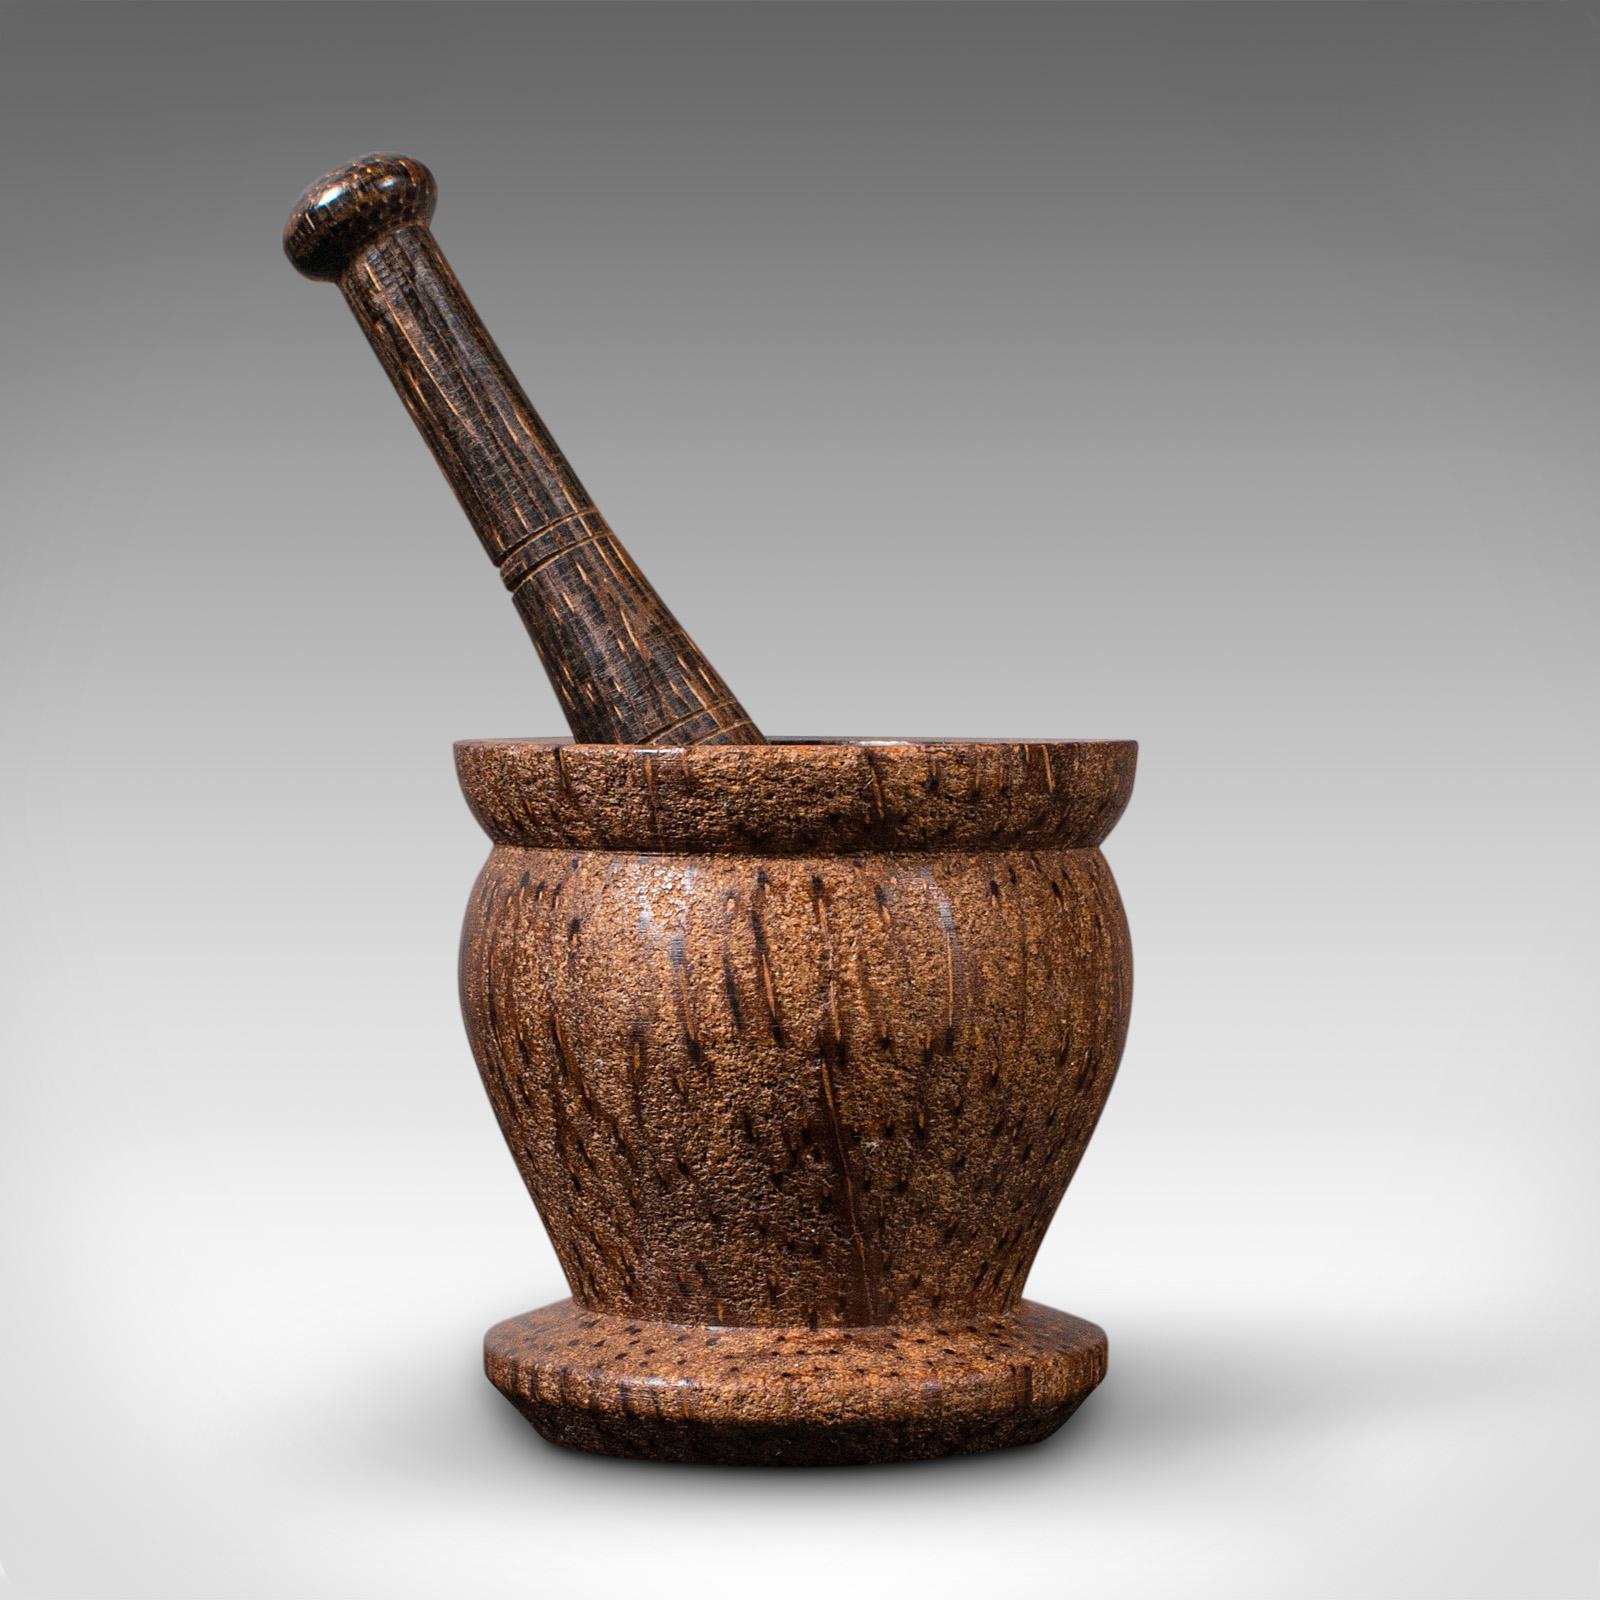 Small Vintage Mortar & Pestle, English, Palmyra, Decorative Treen, Apothecary In Good Condition For Sale In Hele, Devon, GB